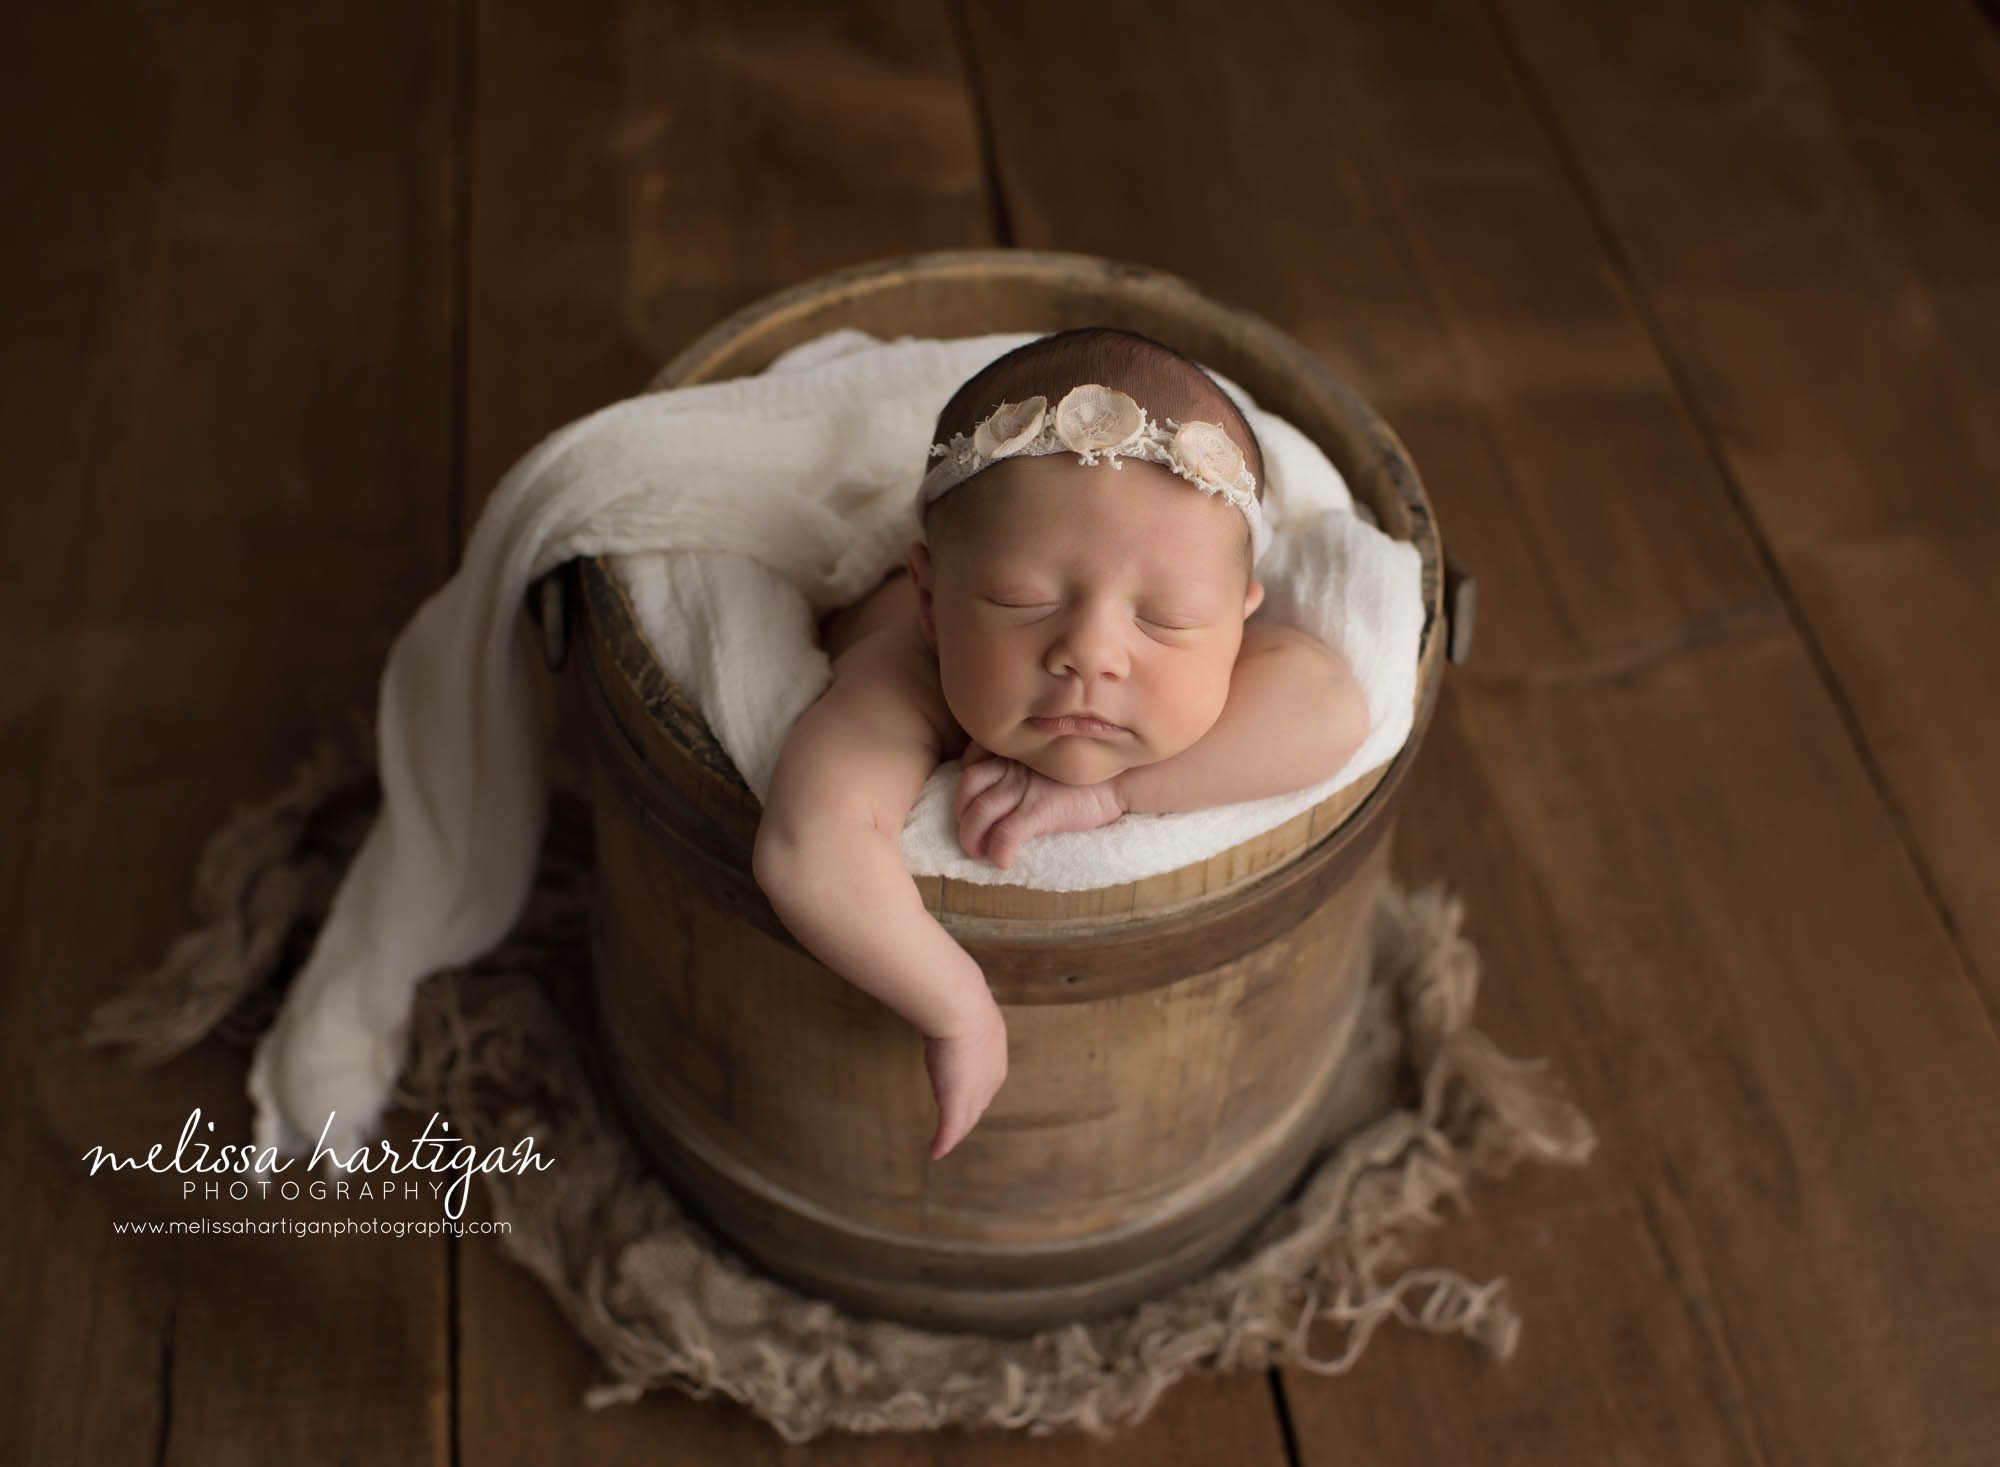 baby girl posed in rustic bucket with cream fabric draped over rustic newborn photos professional newborn photography in CT